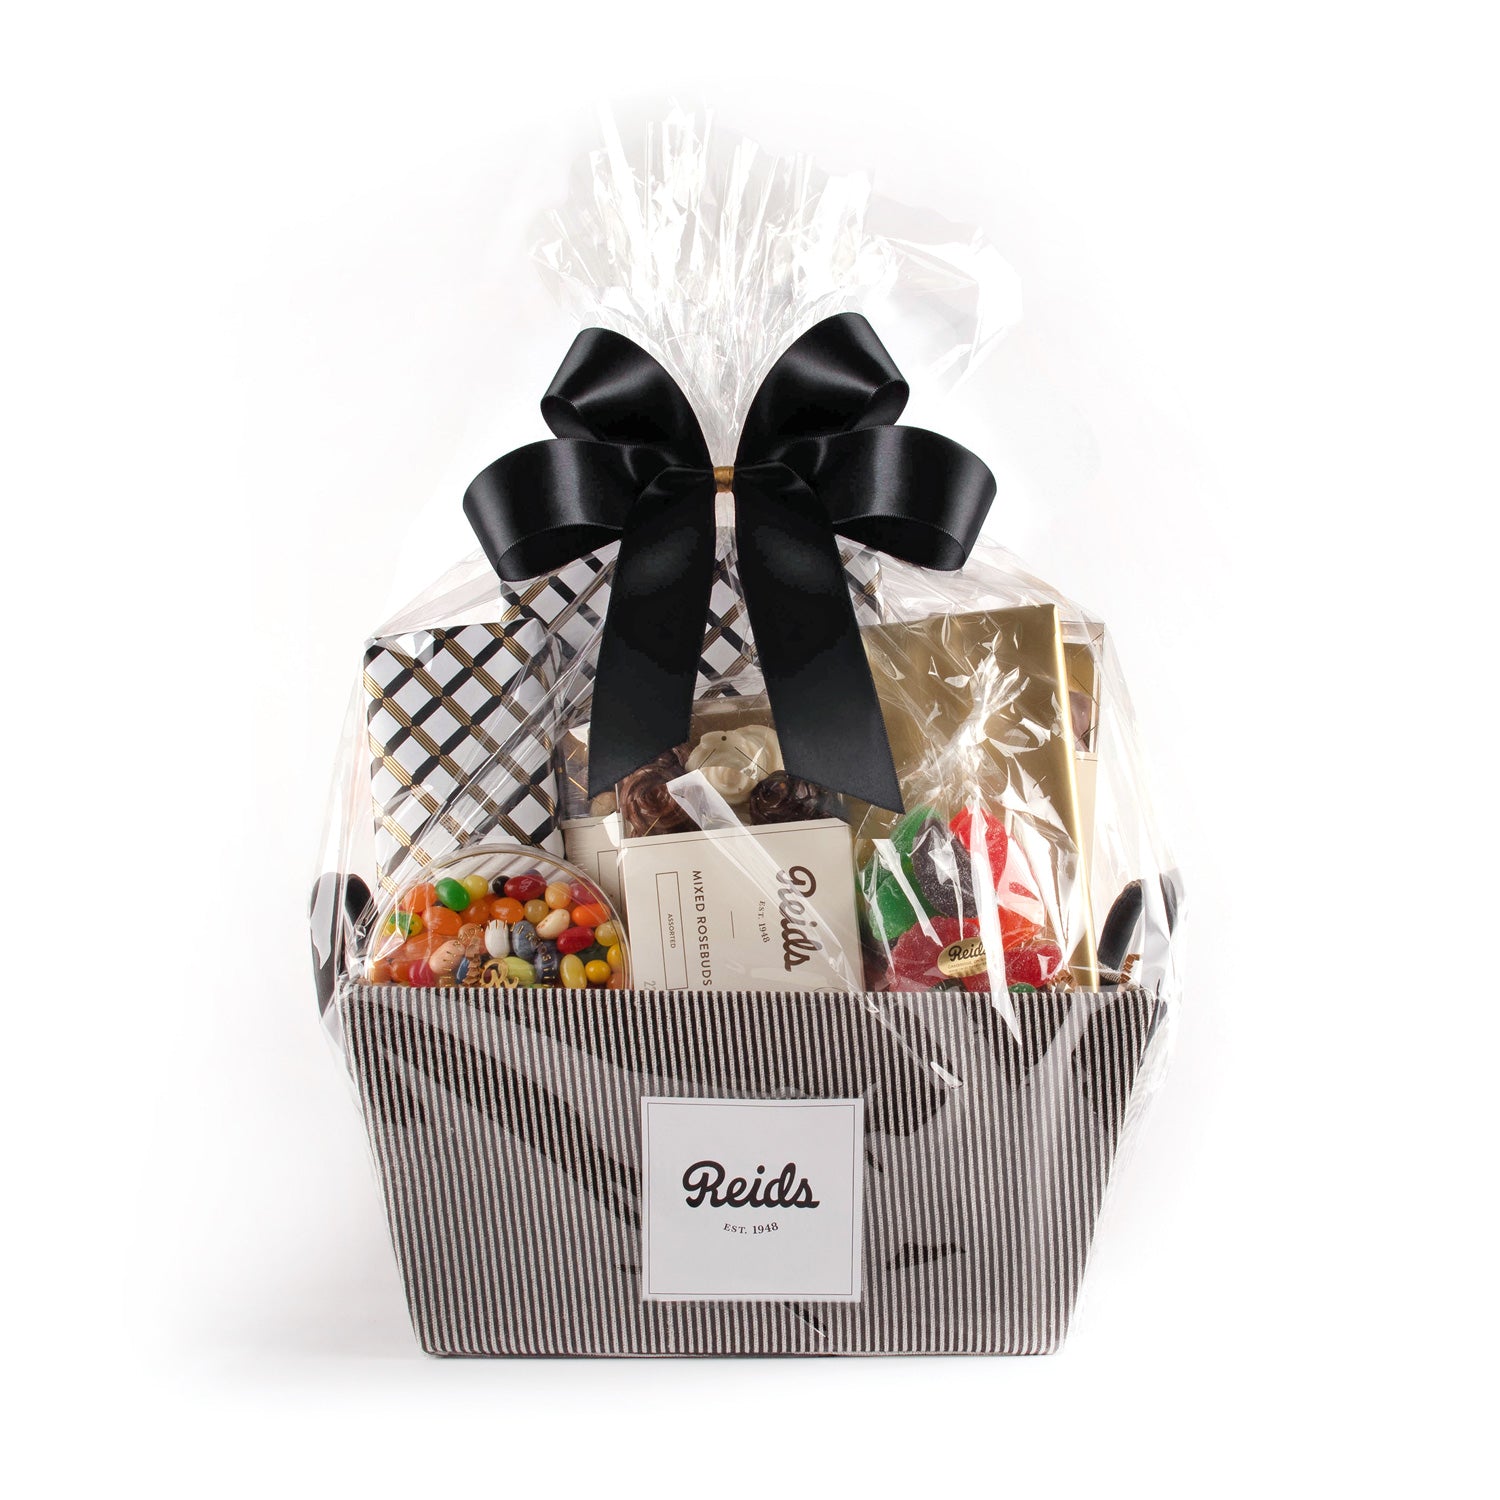 The large basket comes in a black and white pinstriped basket wrapped in cellophane and tied with a bow